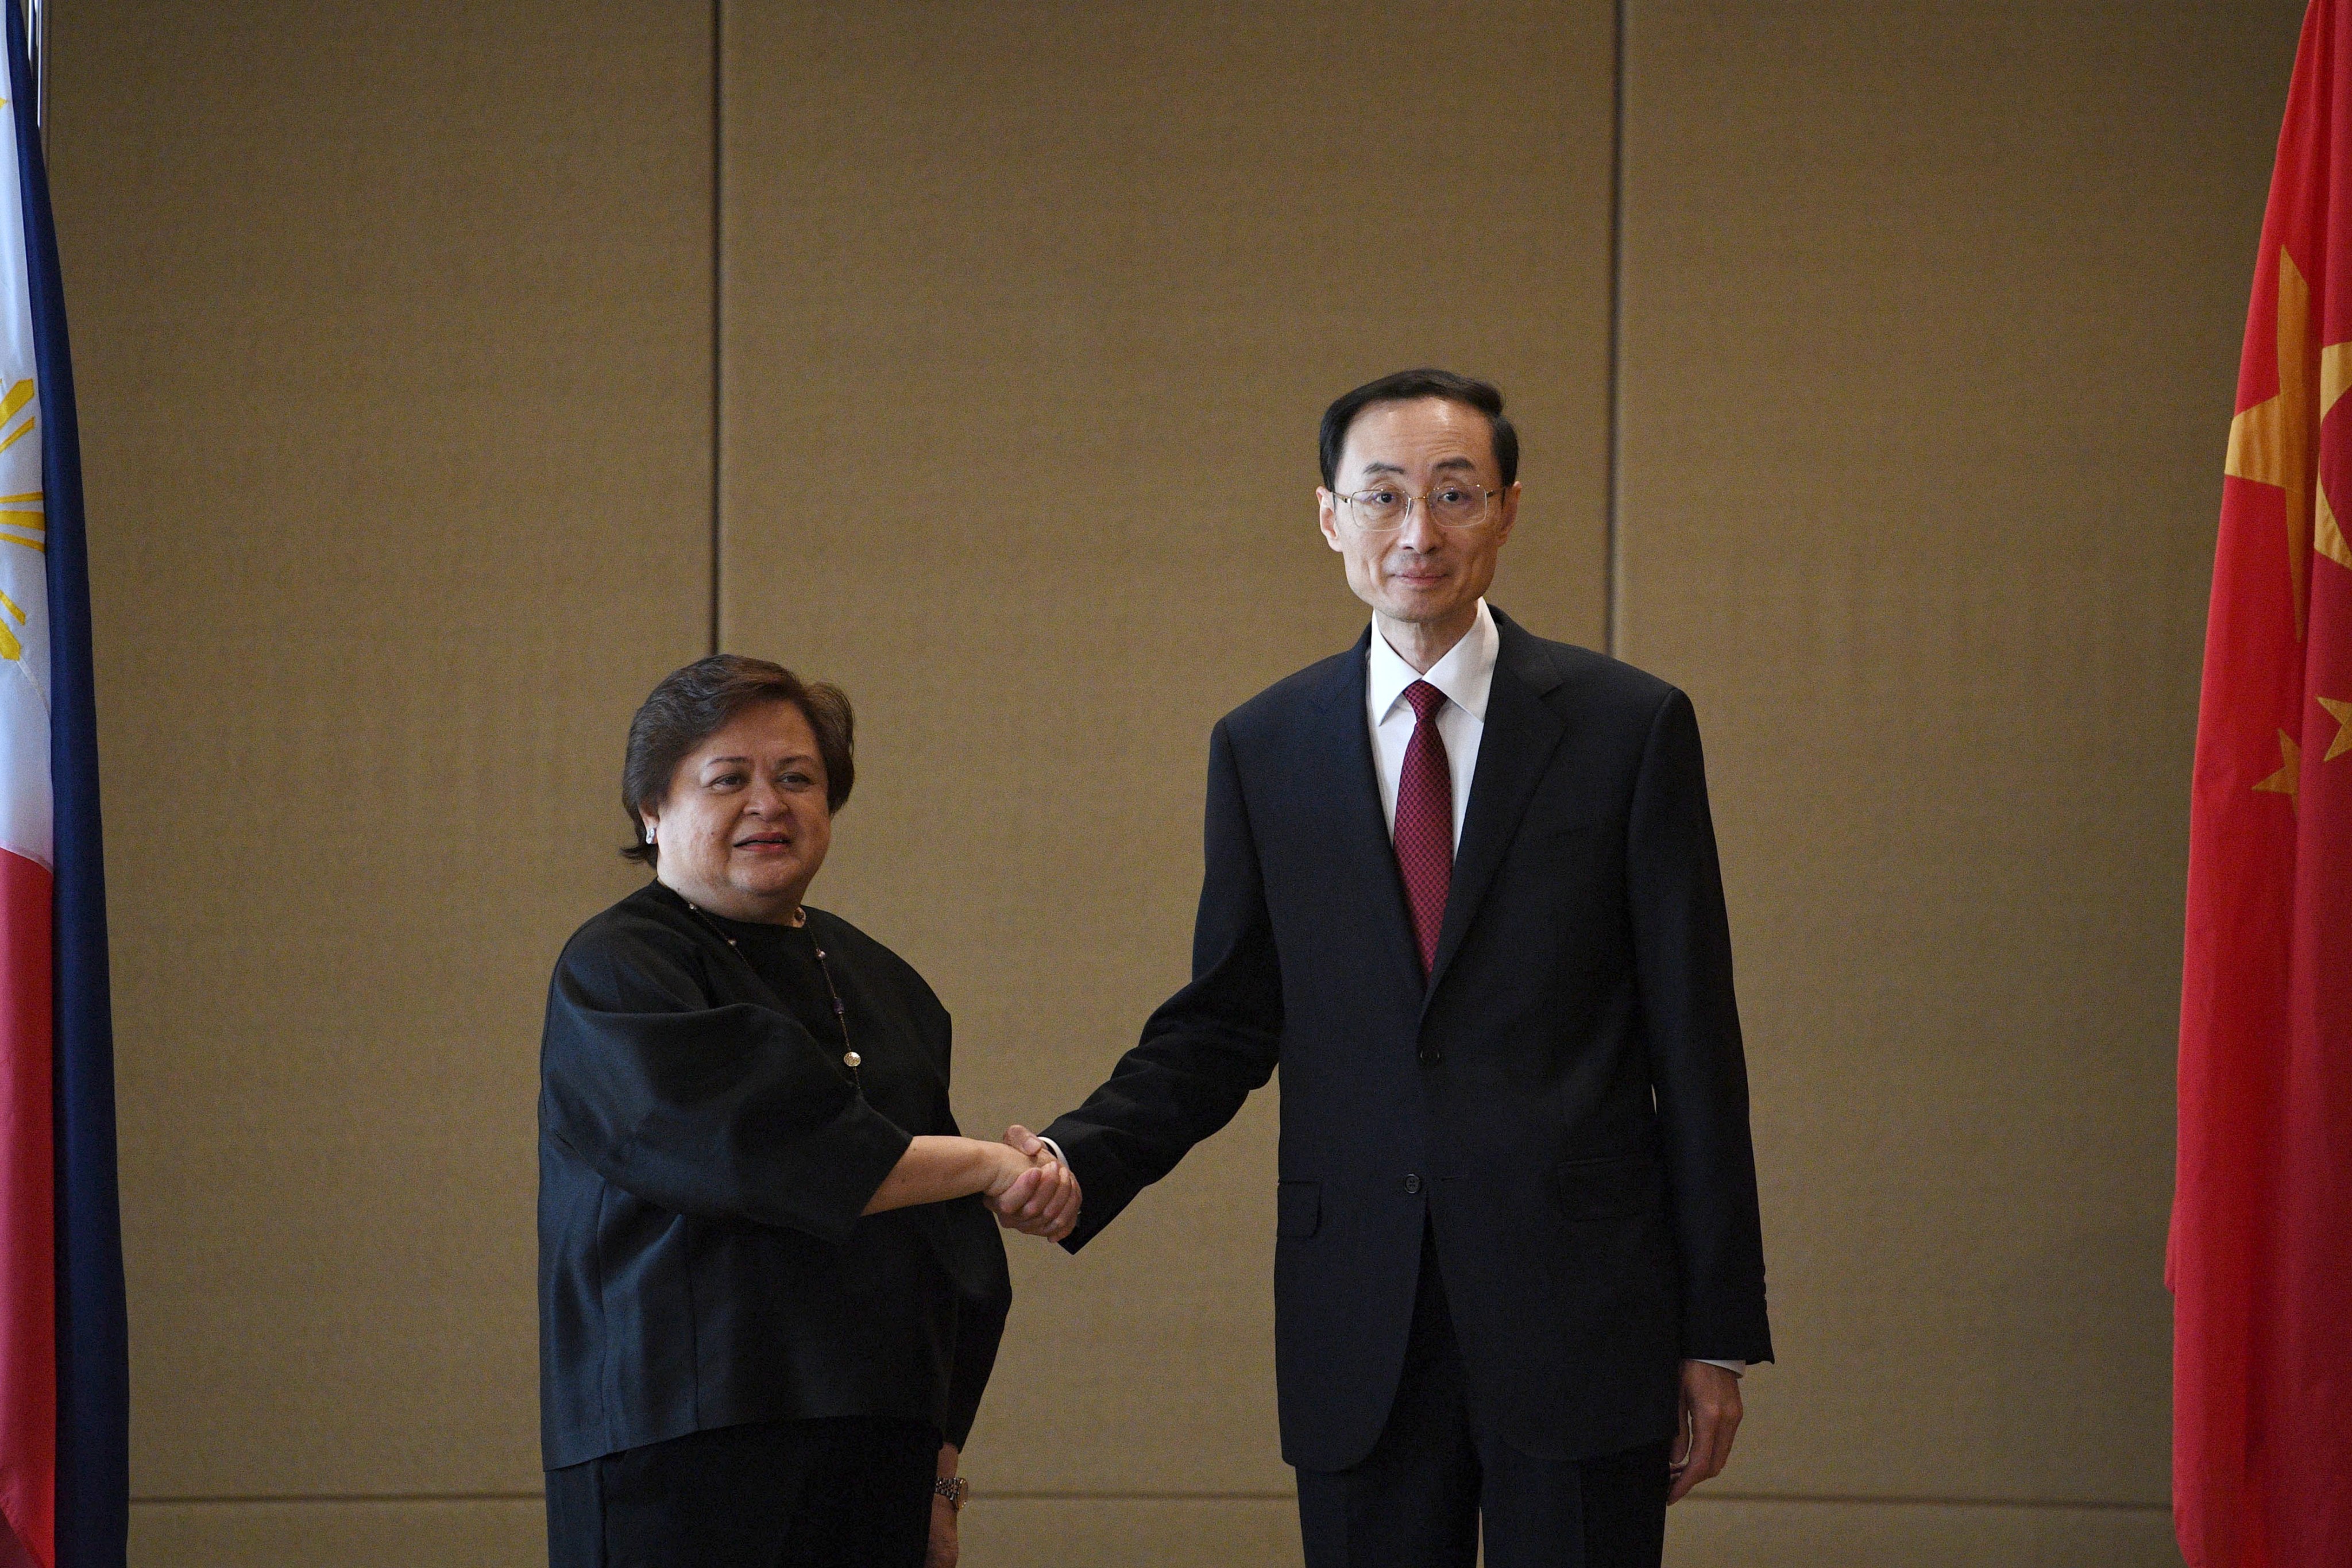 Filipino Foreign Affairs Undersecretary Maria Lourdes Lazaro and Chinese Vice Foreign Minister Sun Weidong shake hands during a bilateral meeting in Manila. Photo: EPA-EFE